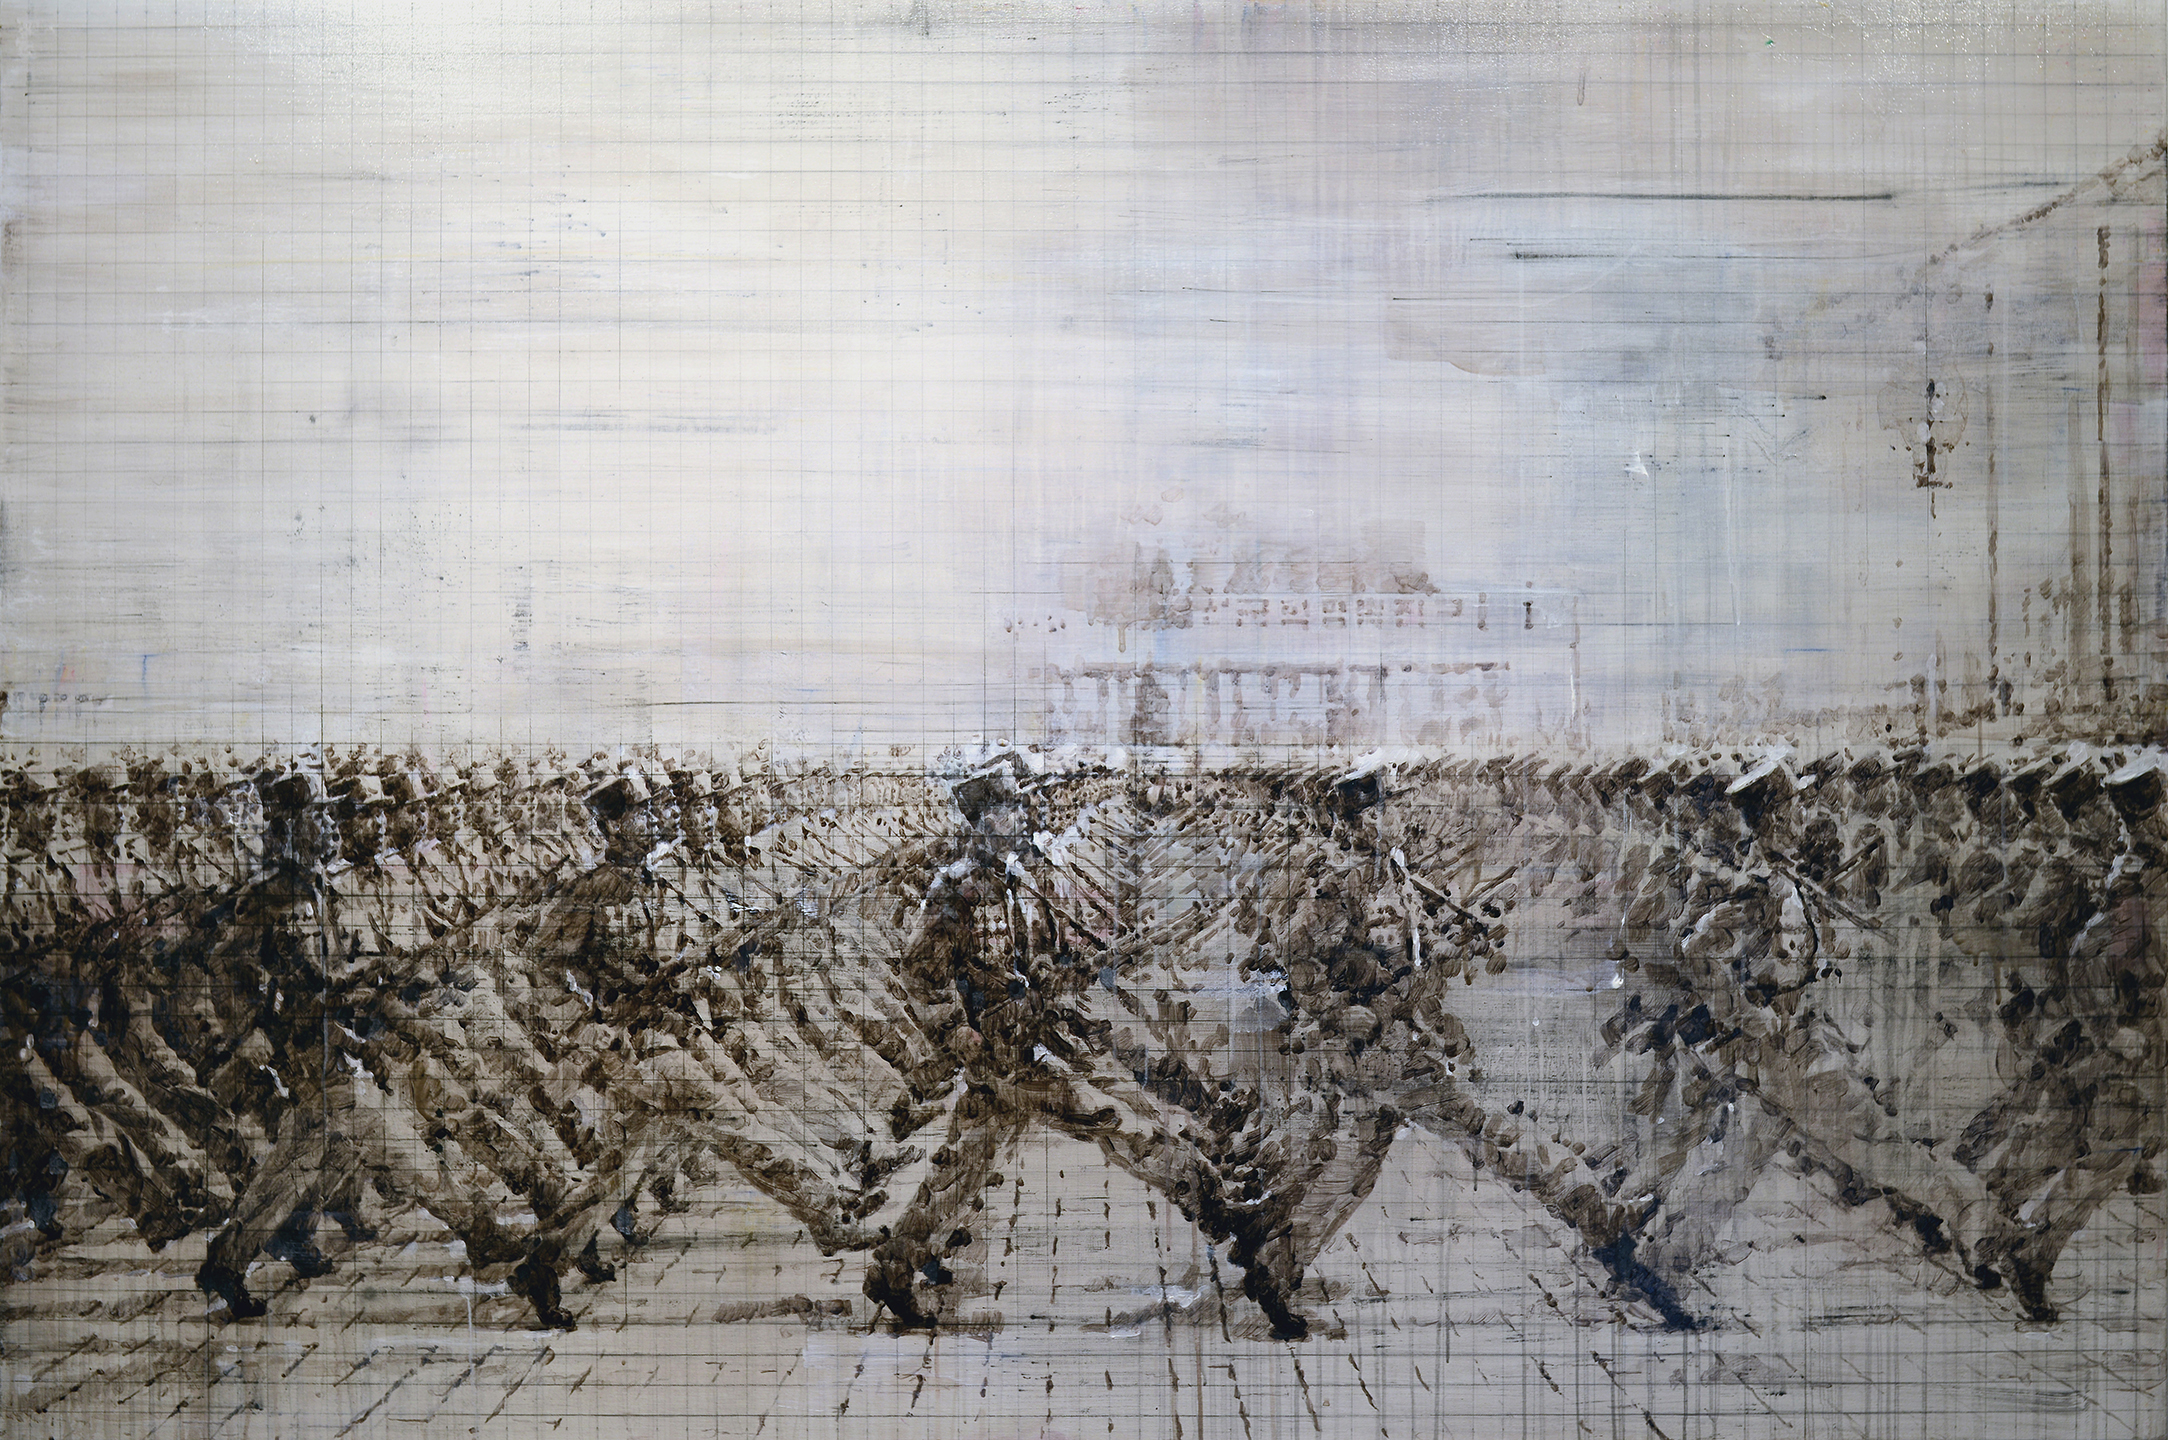 Soldiers, 2015, Acrylic ink and gel mediums on canvas, 48x72 inches